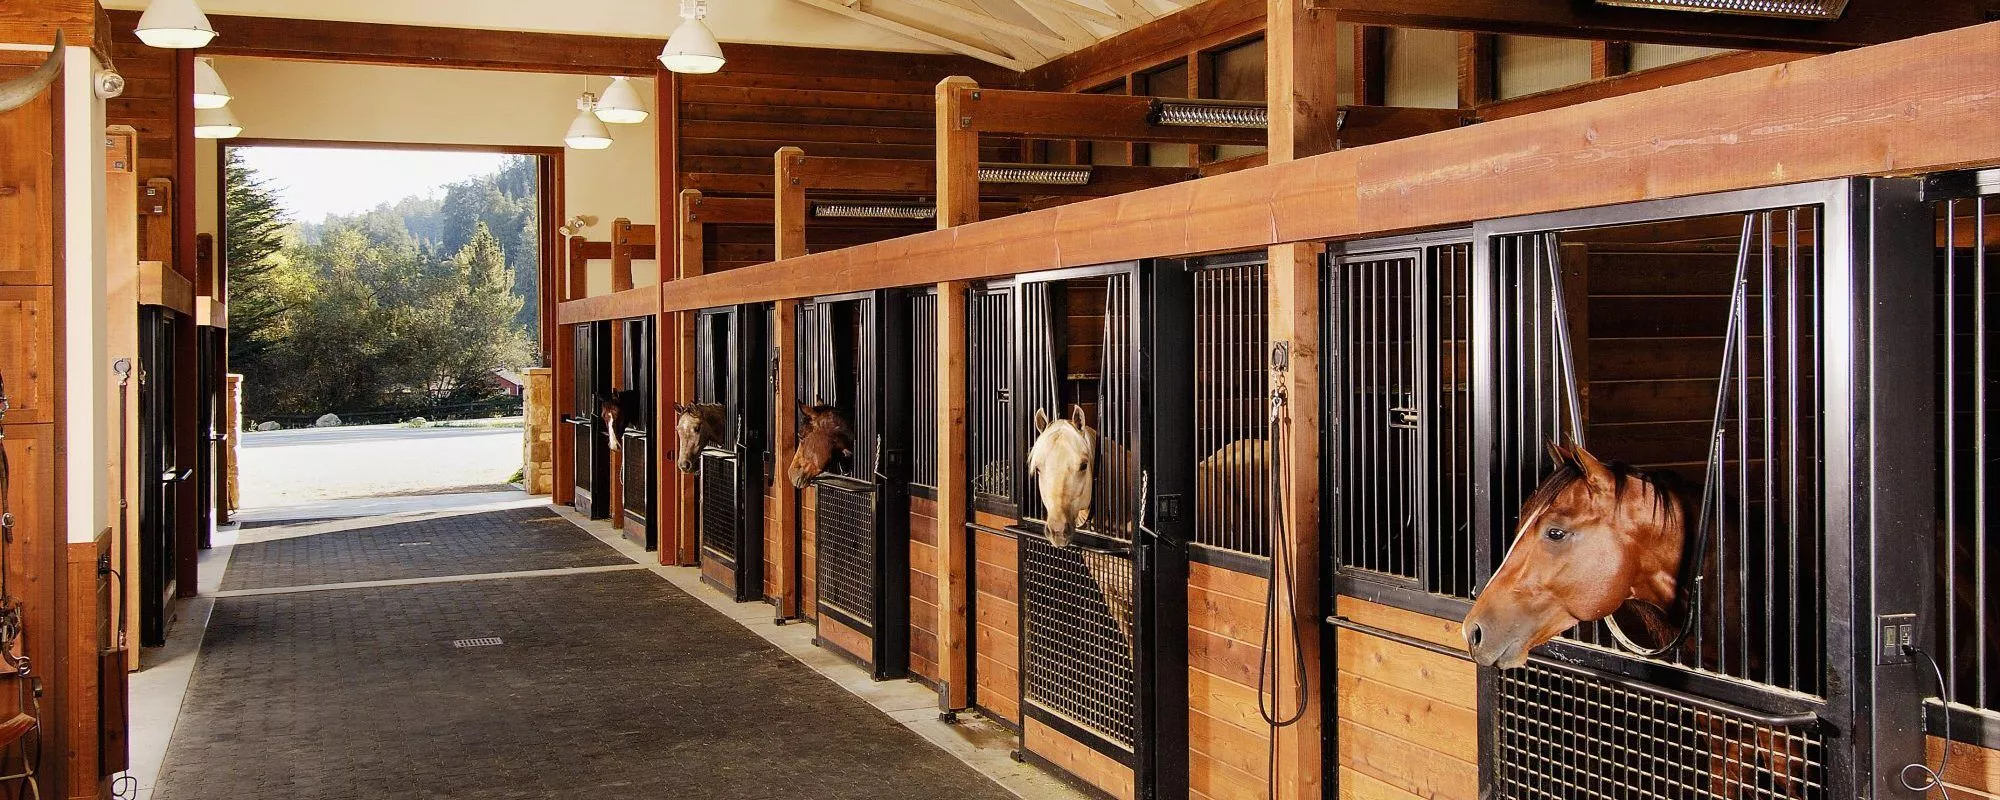 COMMERCIAL HORSE PROPERTIES<br />
